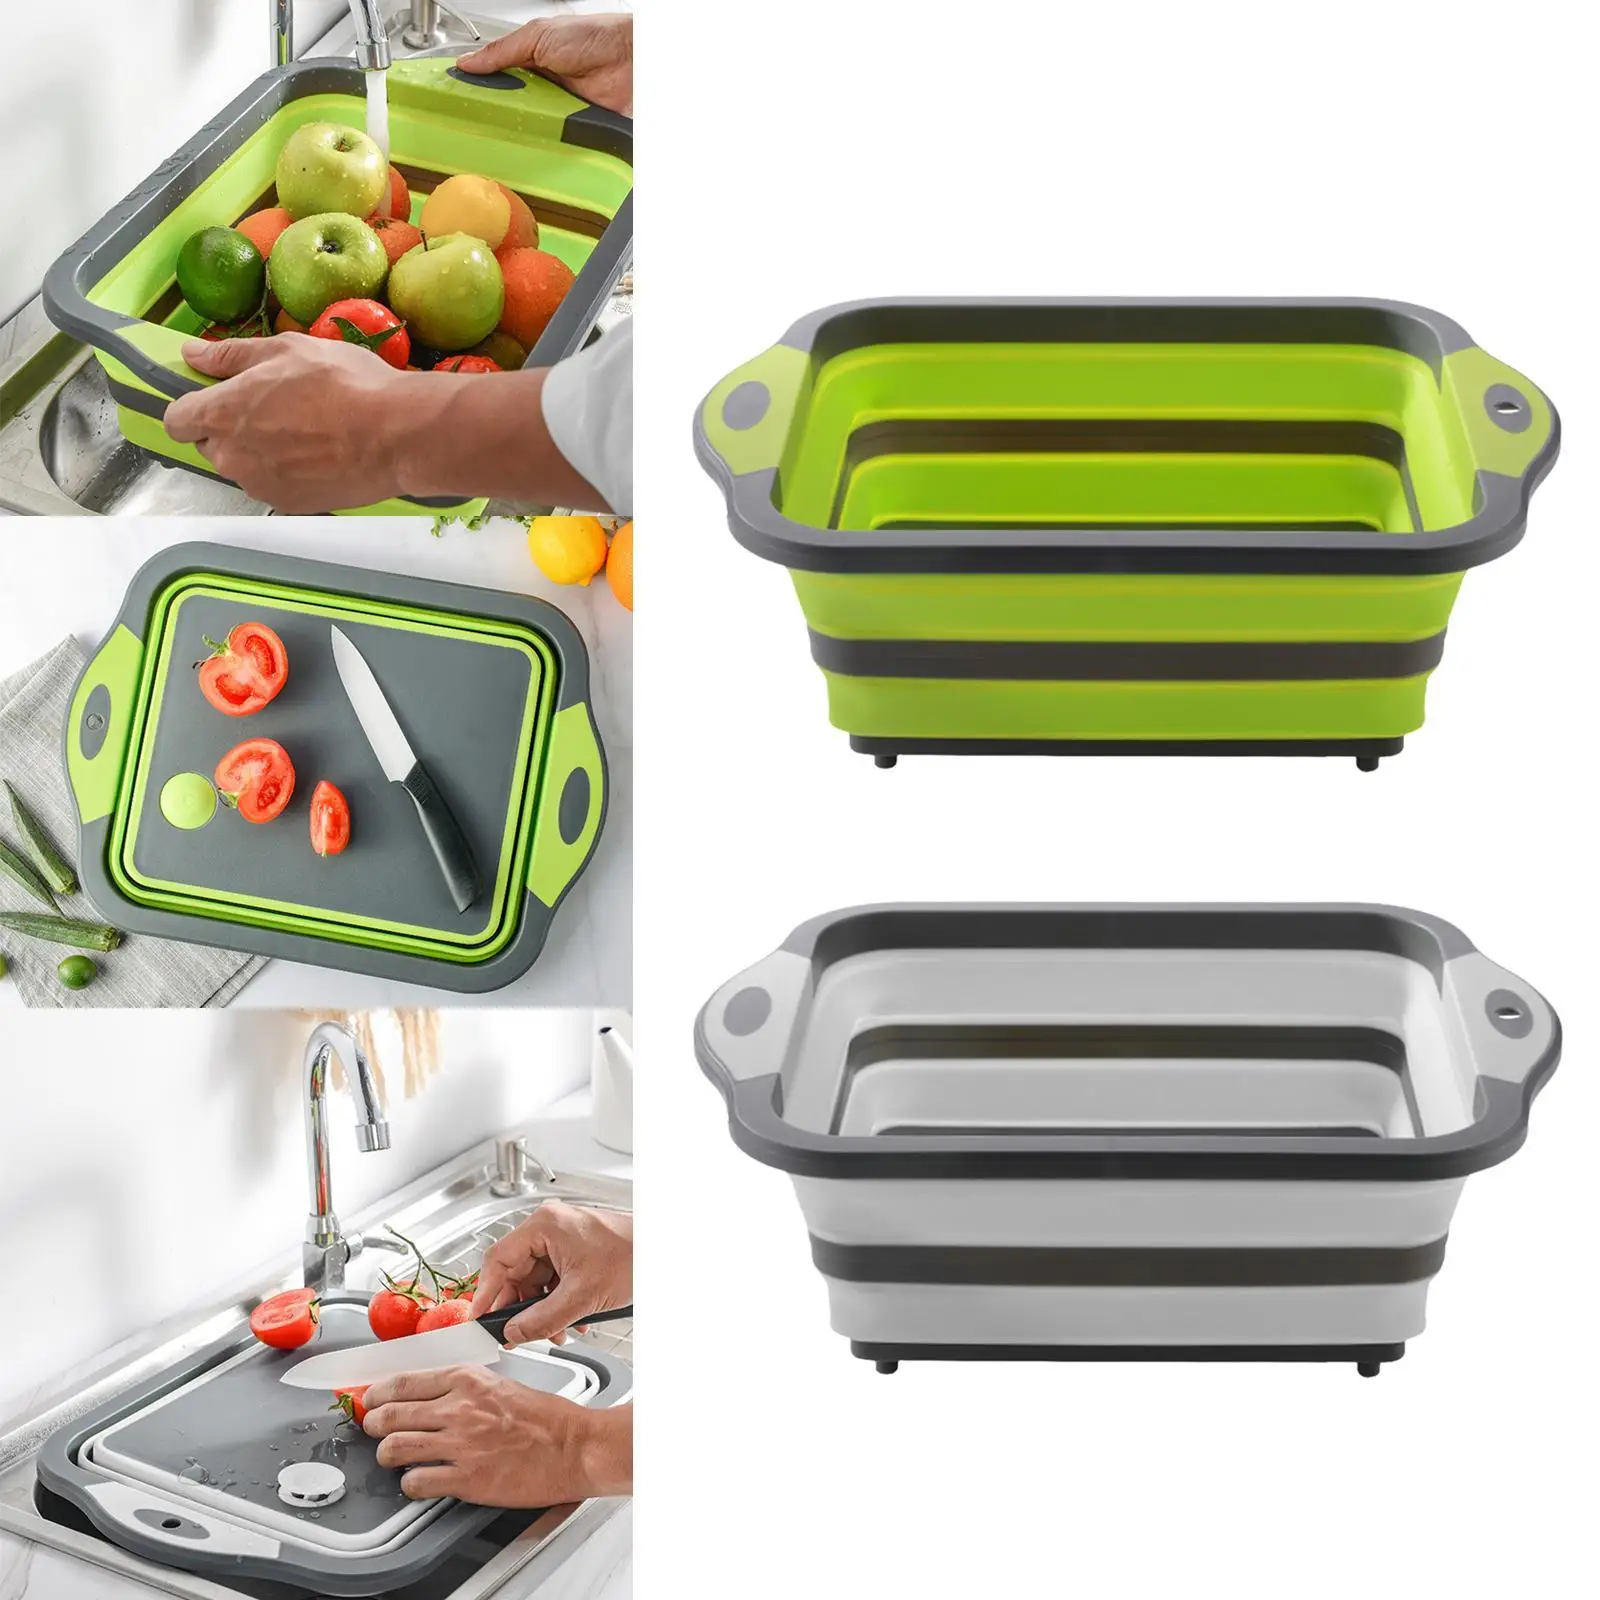 Multifunction Collapsible Cutting Board Kitchen Washing Fruits Sink Basket Space Saving for Indoor Outdoor